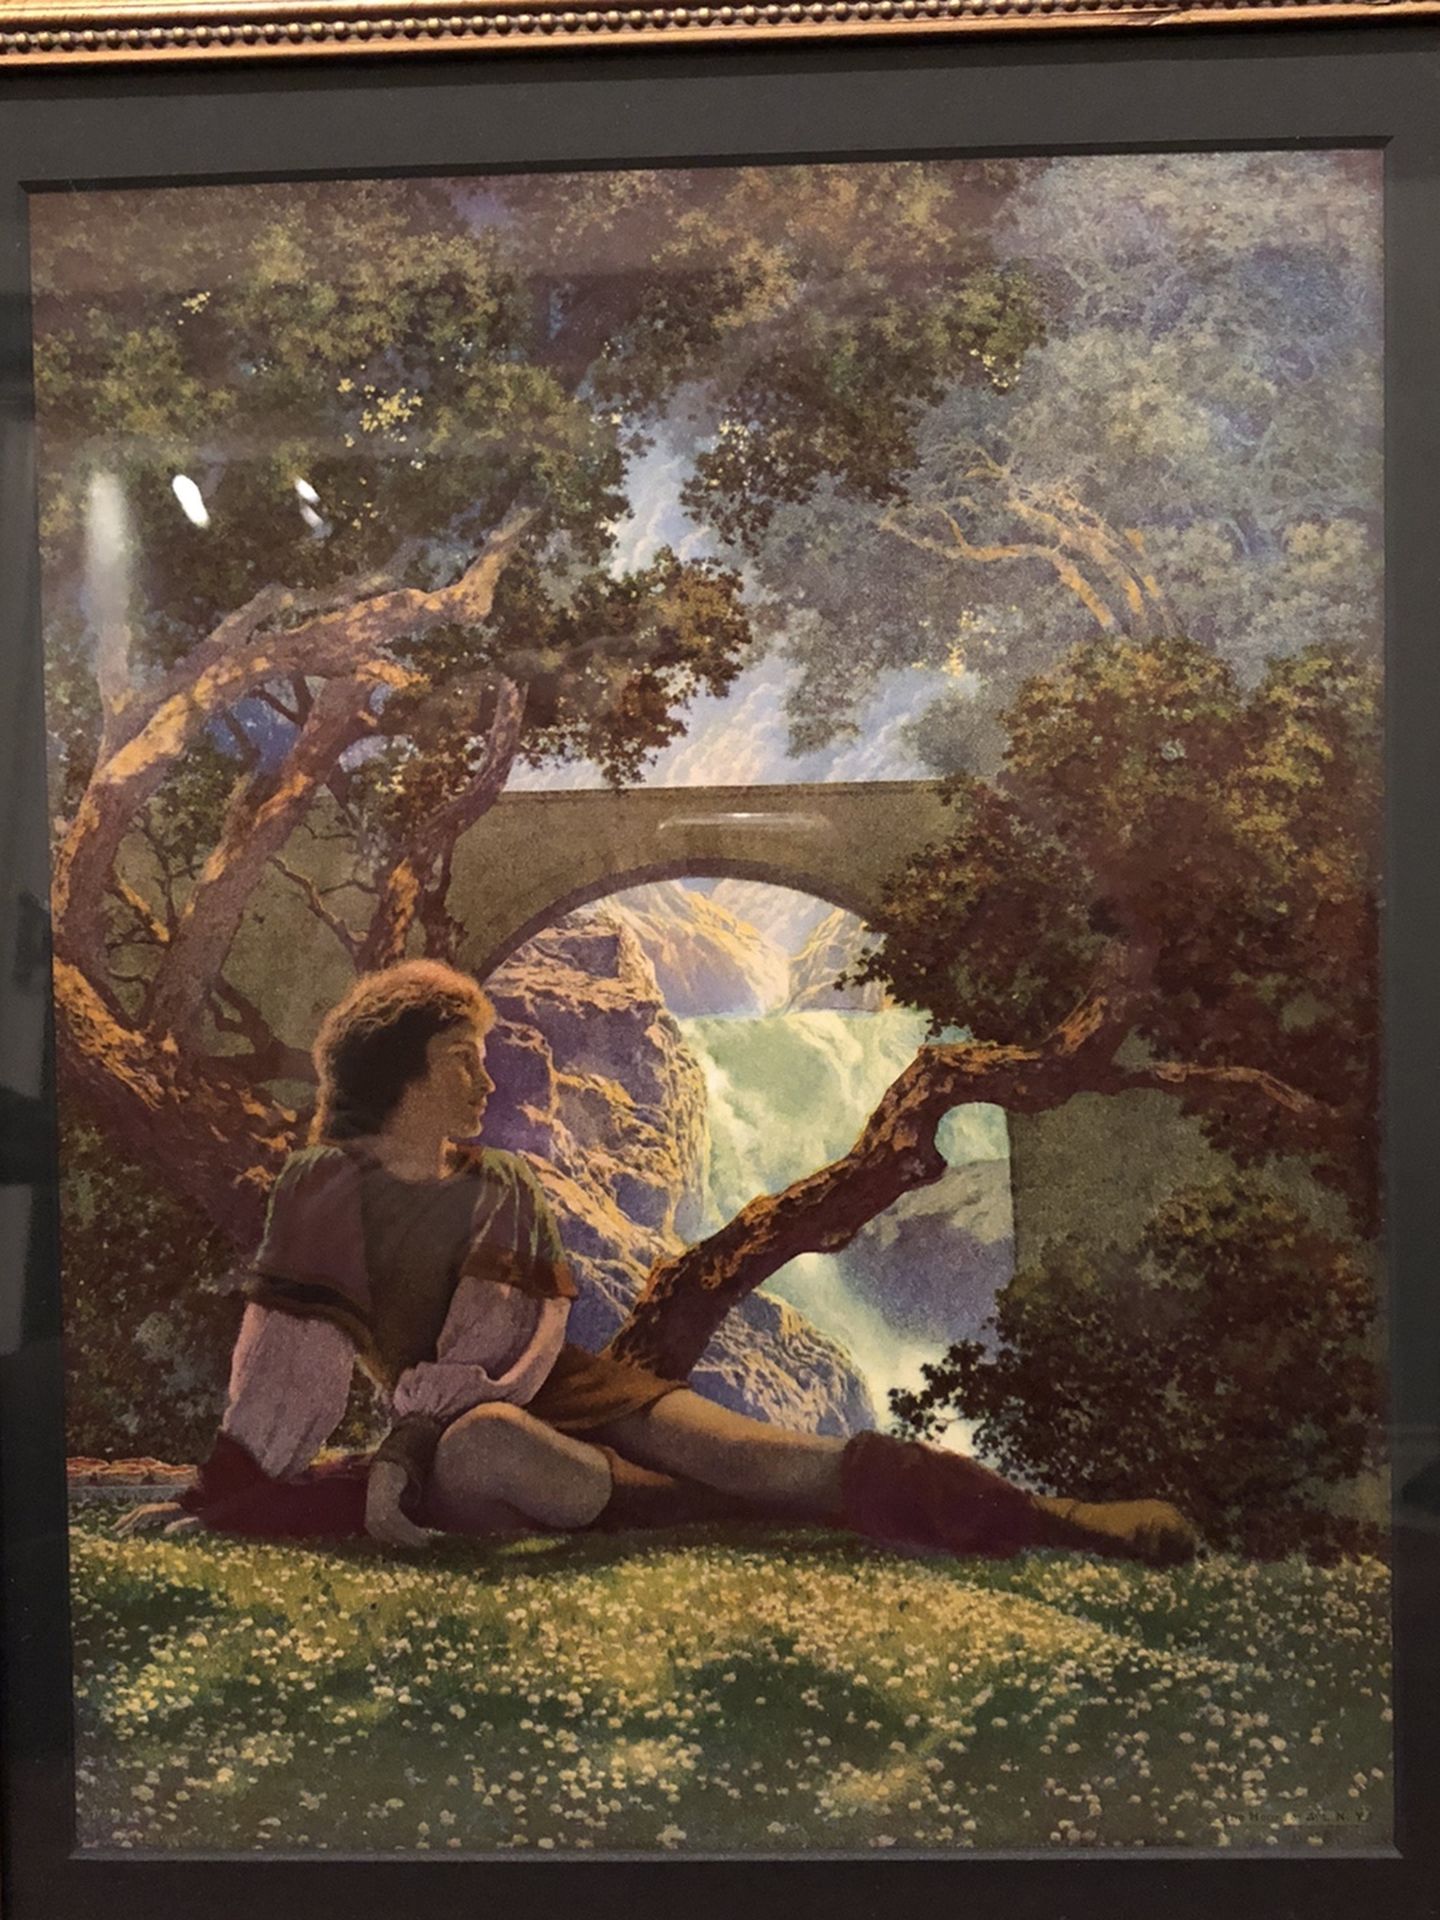 Maxfield Parrish Poster Print "The Prince" Wall Art